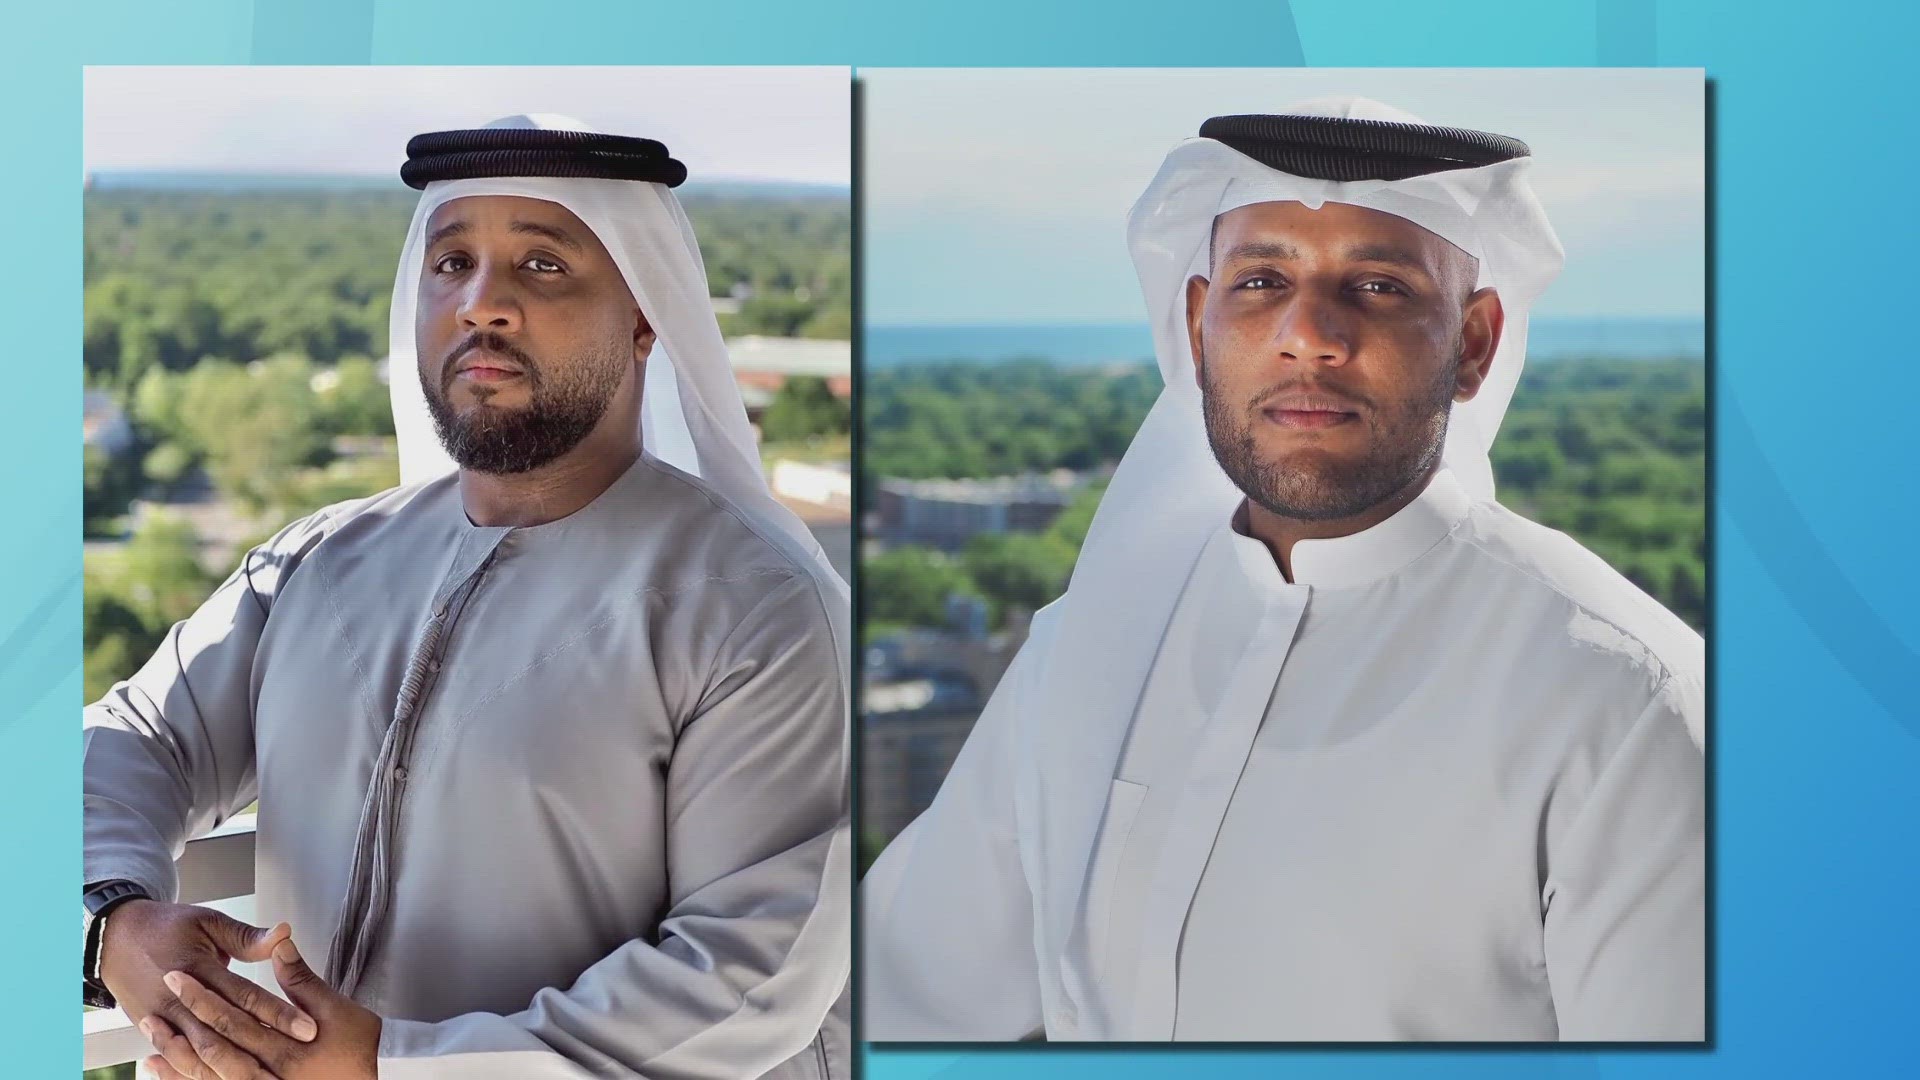 41-year-old Zubair Abdur Razzaq Al Zubair claimed to be a United Arab Emirates prince. Prosecutors say he and his brother tricked victims out of nearly $10 million.